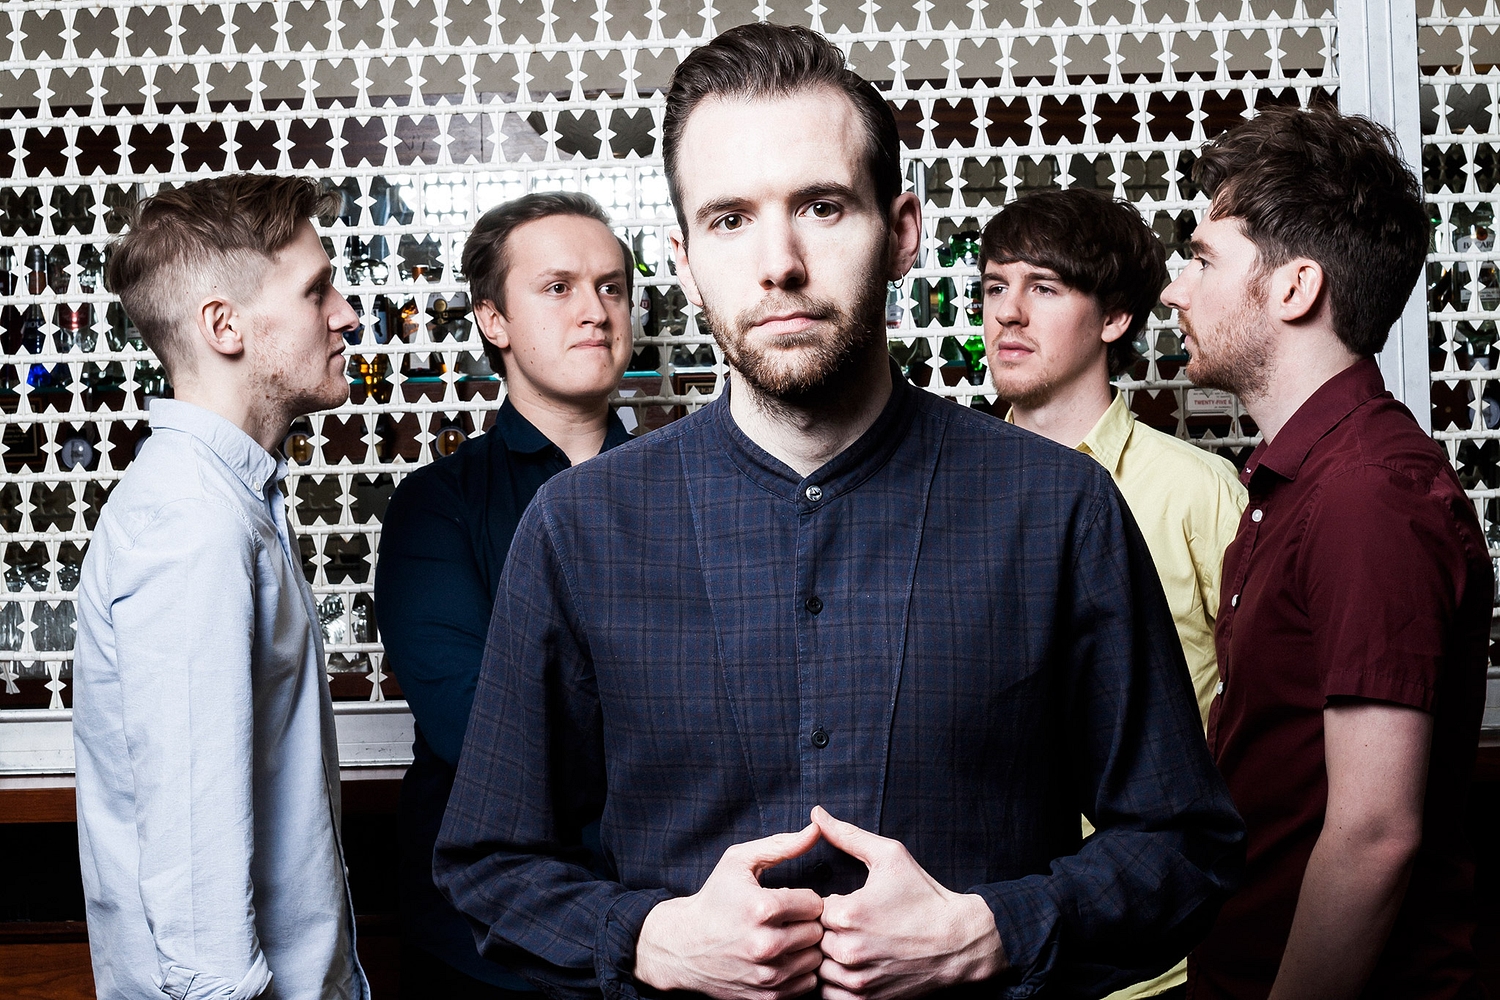 Dutch Uncles, Palace & more ready themselves for DIY's Calling Out Stage at Kendal Calling